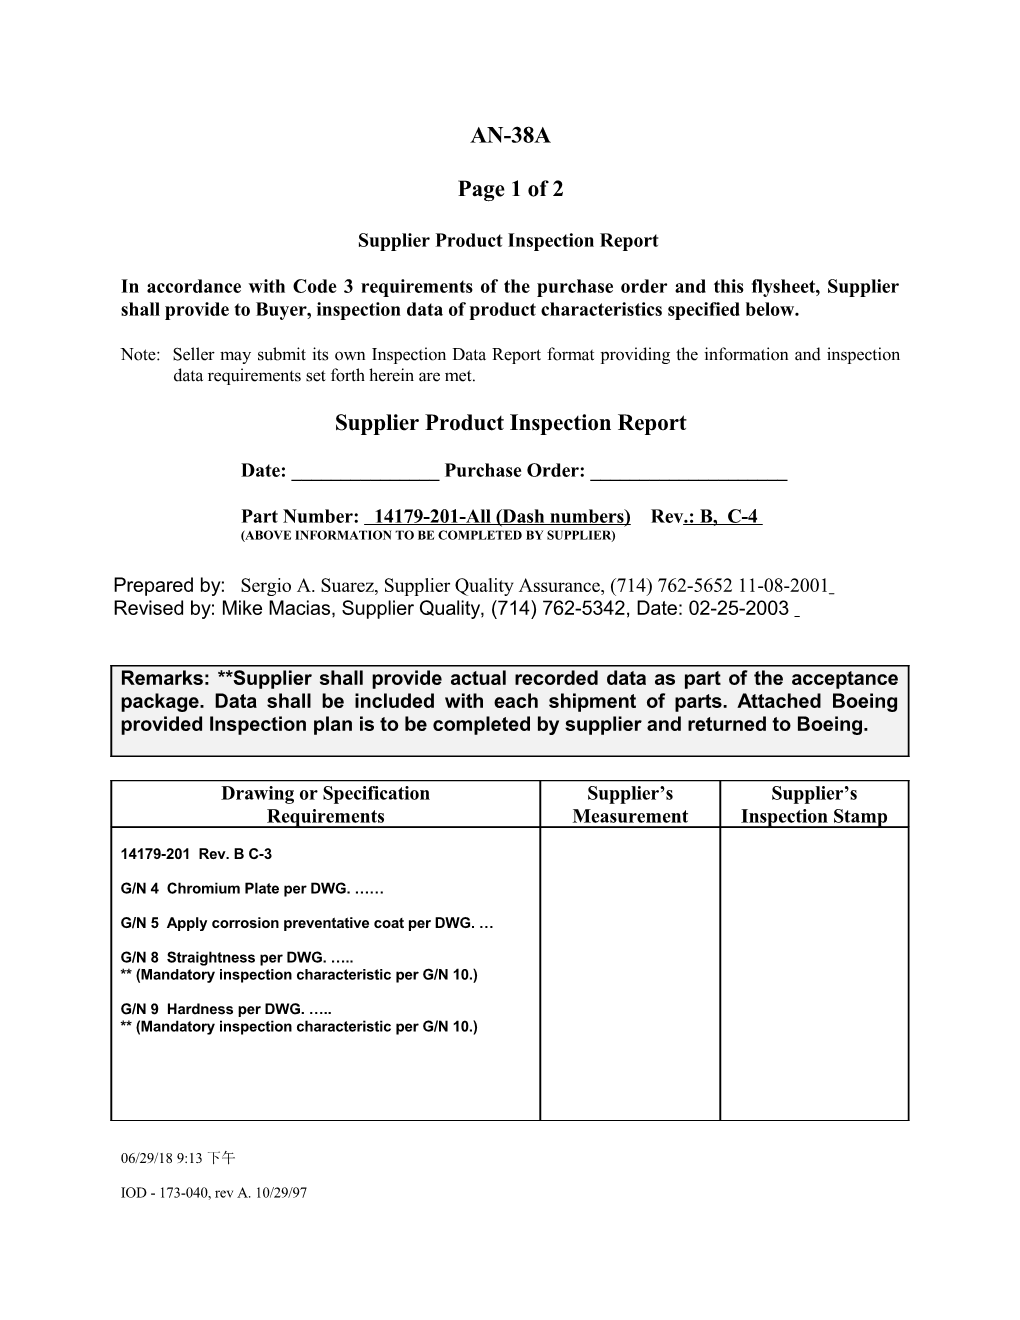 Supplier Product Inspection Report